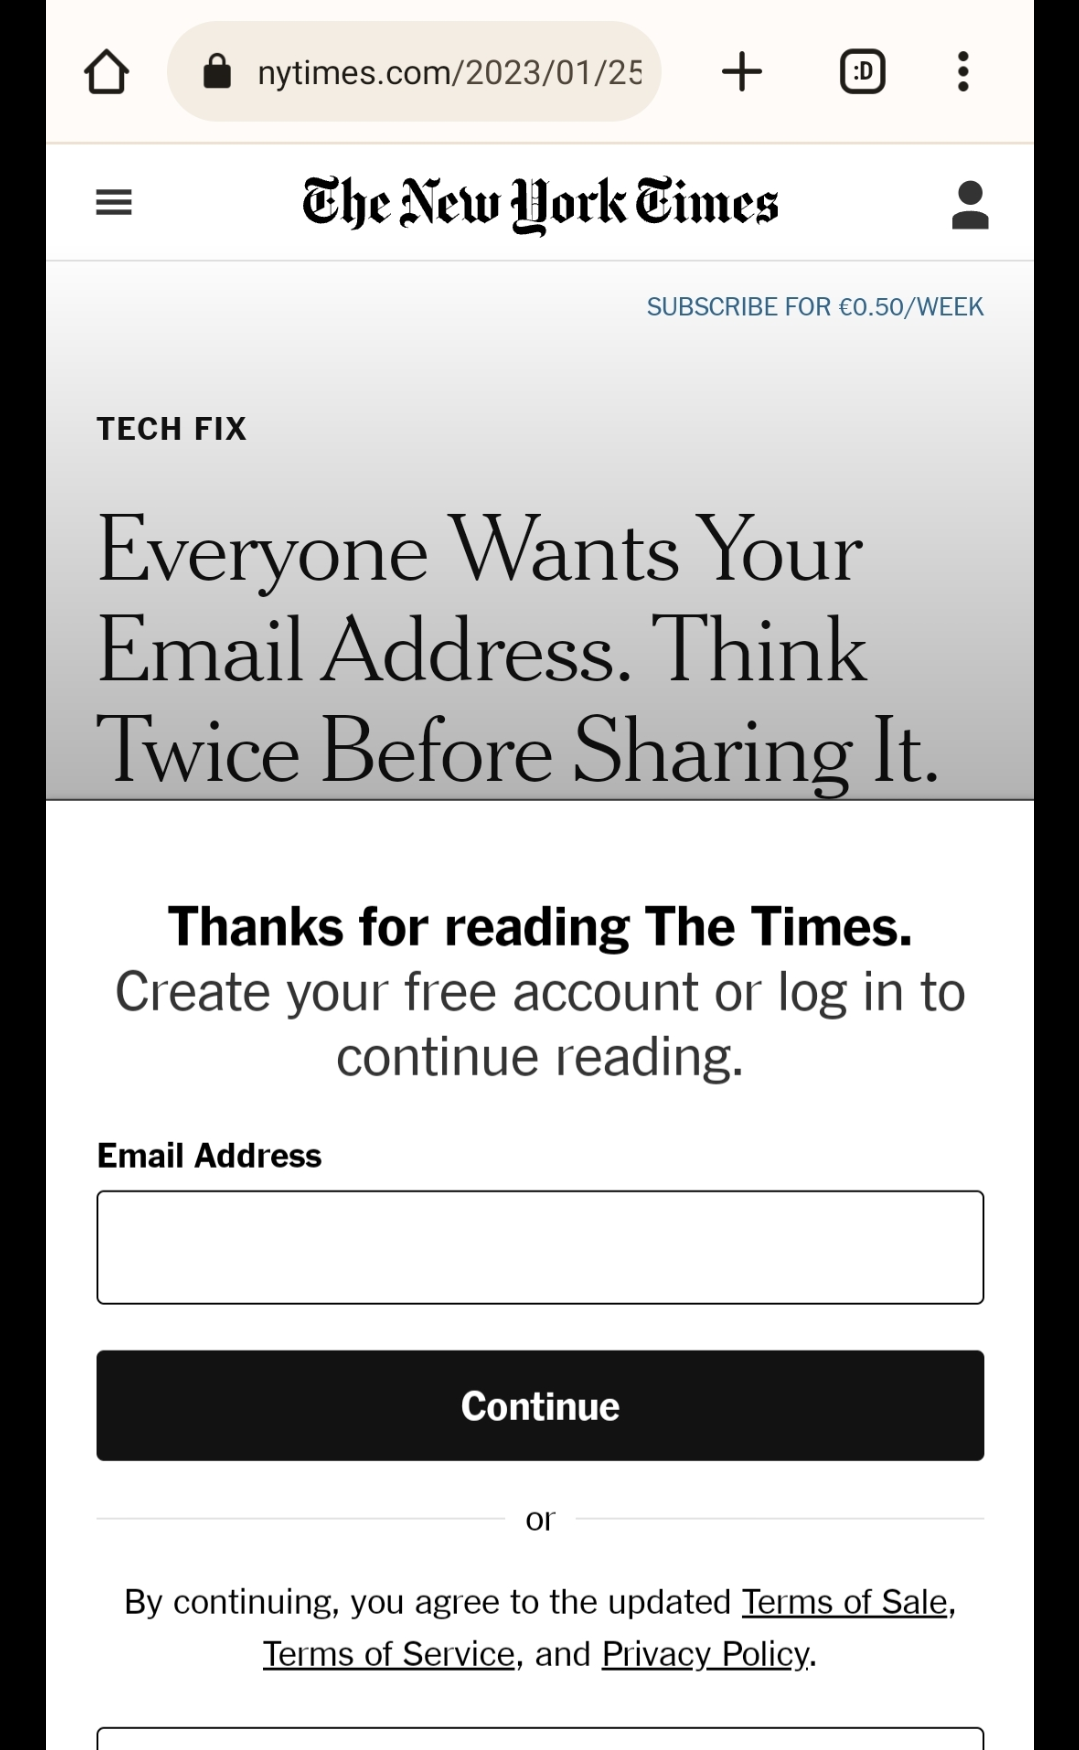 New York Times headline: Everyone wants your email address. Think twice before sharing it. And beneath this, an invitiation to enter your email address and create a free account to continue reading.